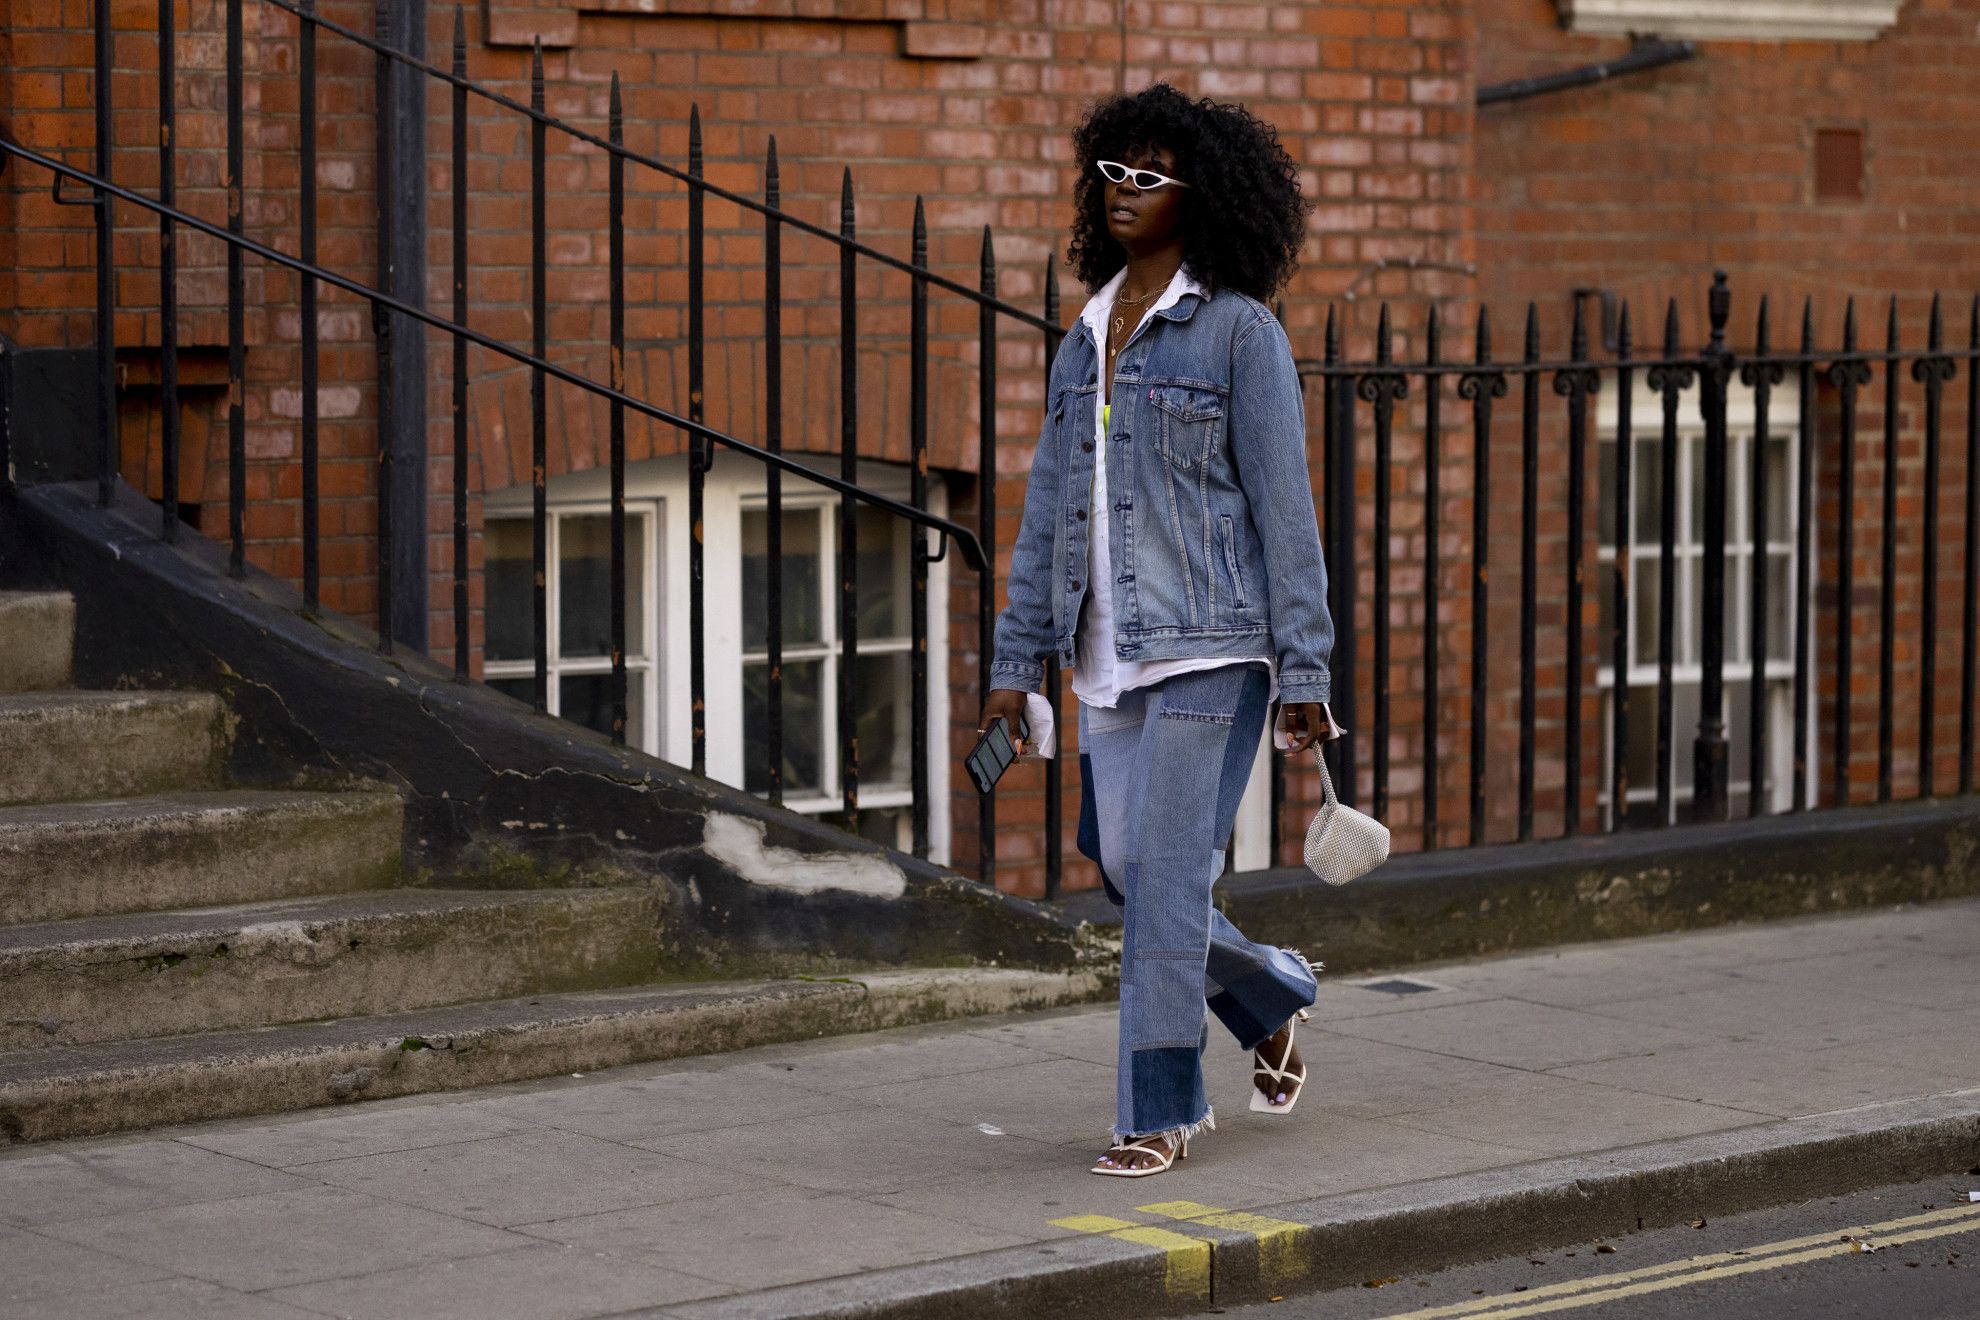 17 Best Denim Dresses You Won't Mind Wearing All Day